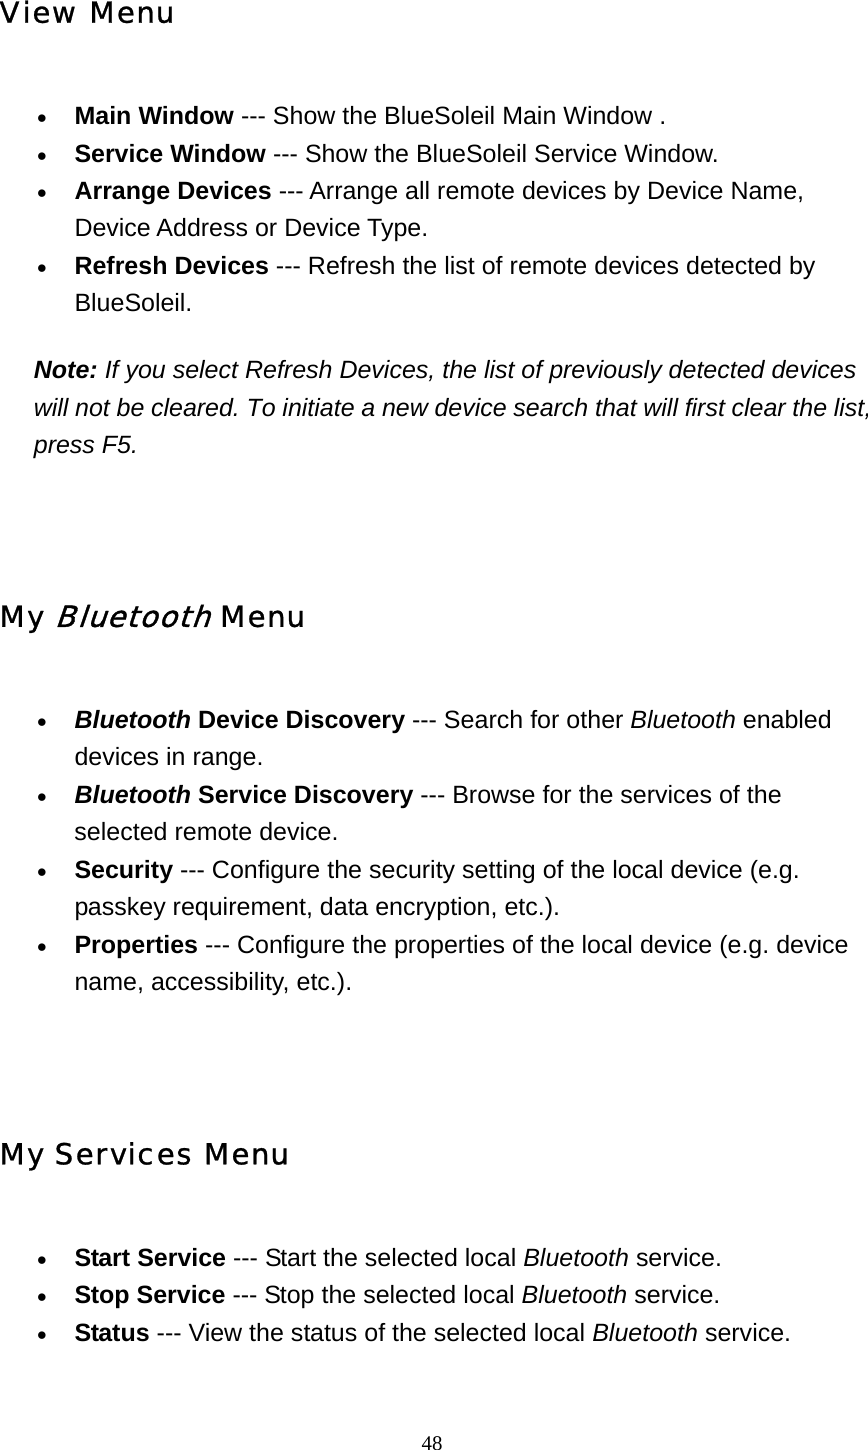   48View Menu • Main Window --- Show the BlueSoleil Main Window .   • Service Window --- Show the BlueSoleil Service Window.   • Arrange Devices --- Arrange all remote devices by Device Name, Device Address or Device Type.   • Refresh Devices --- Refresh the list of remote devices detected by BlueSoleil.  Note: If you select Refresh Devices, the list of previously detected devices will not be cleared. To initiate a new device search that will first clear the list, press F5.   My Bluetooth Menu • Bluetooth Device Discovery --- Search for other Bluetooth enabled devices in range.   • Bluetooth Service Discovery --- Browse for the services of the selected remote device.   • Security --- Configure the security setting of the local device (e.g. passkey requirement, data encryption, etc.).   • Properties --- Configure the properties of the local device (e.g. device name, accessibility, etc.).     My Services Menu • Start Service --- Start the selected local Bluetooth service.   • Stop Service --- Stop the selected local Bluetooth service.   • Status --- View the status of the selected local Bluetooth service.   